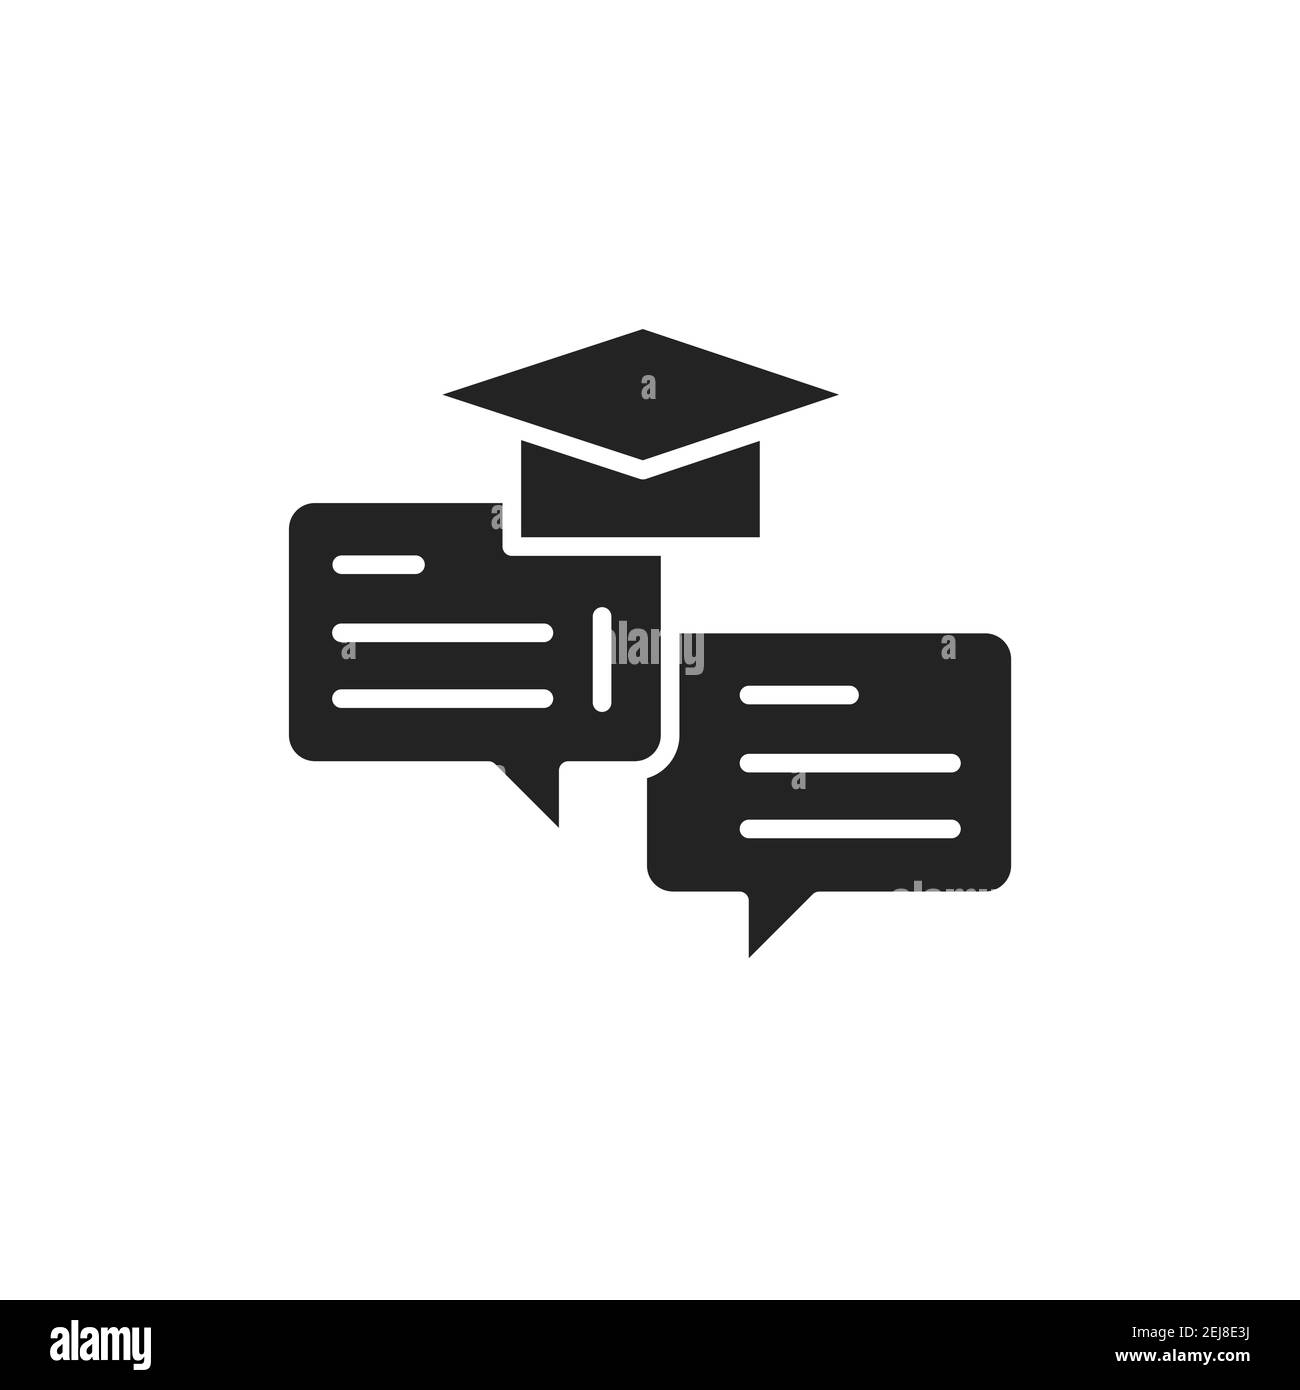 Oratory courses black glyph icon. Outline pictogram for web page, mobile app, promo. Vector illustration Stock Vector